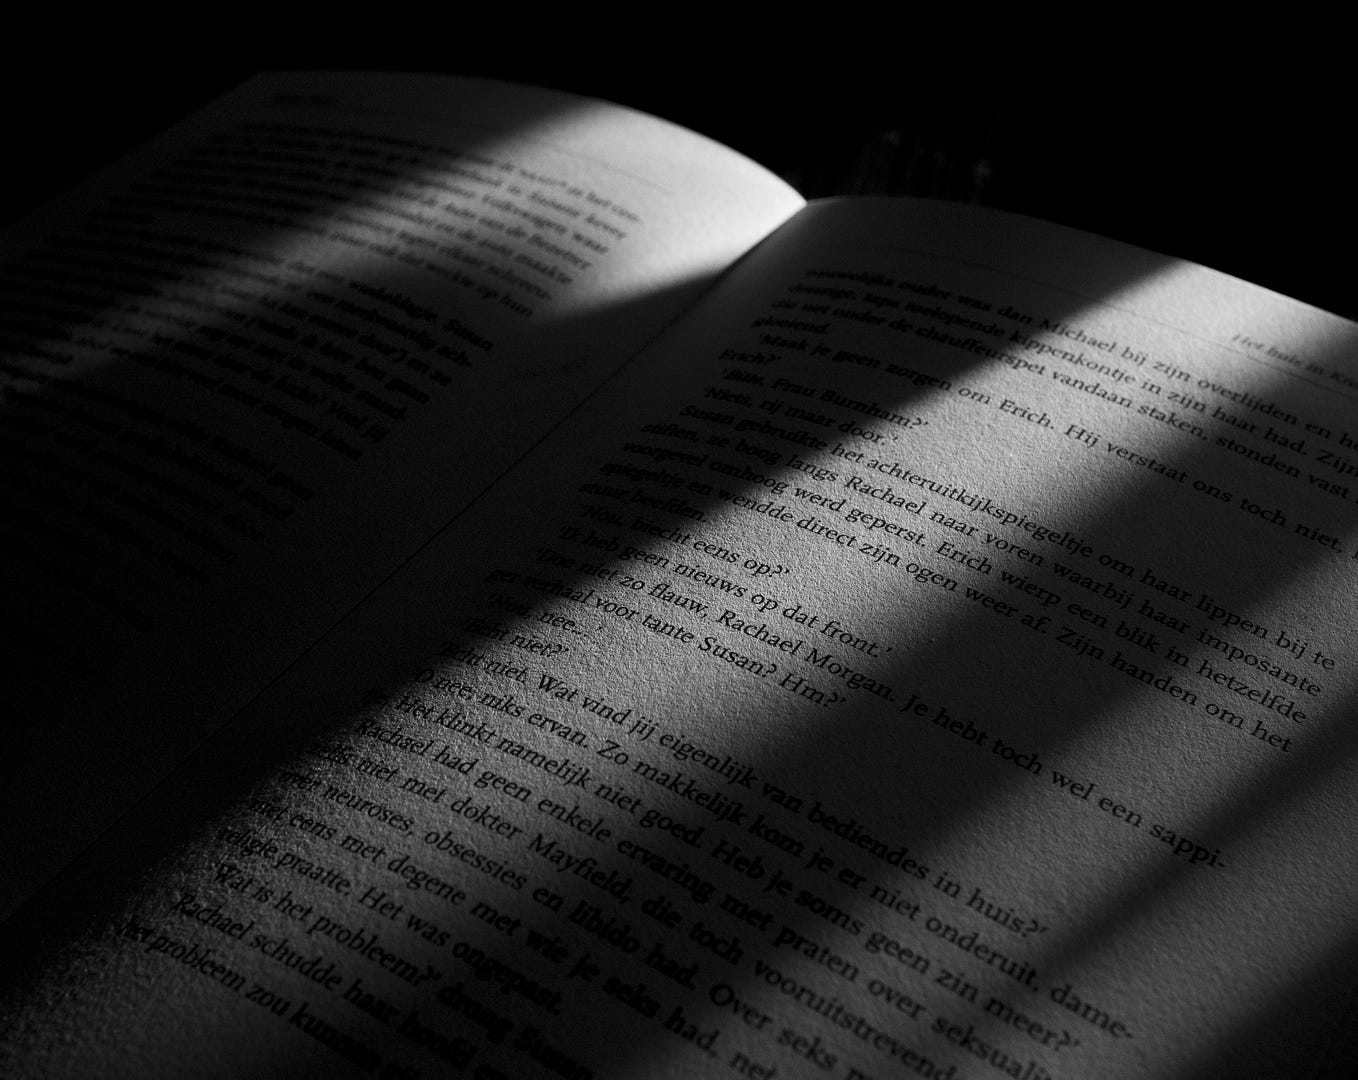 A book in a dimly lit room